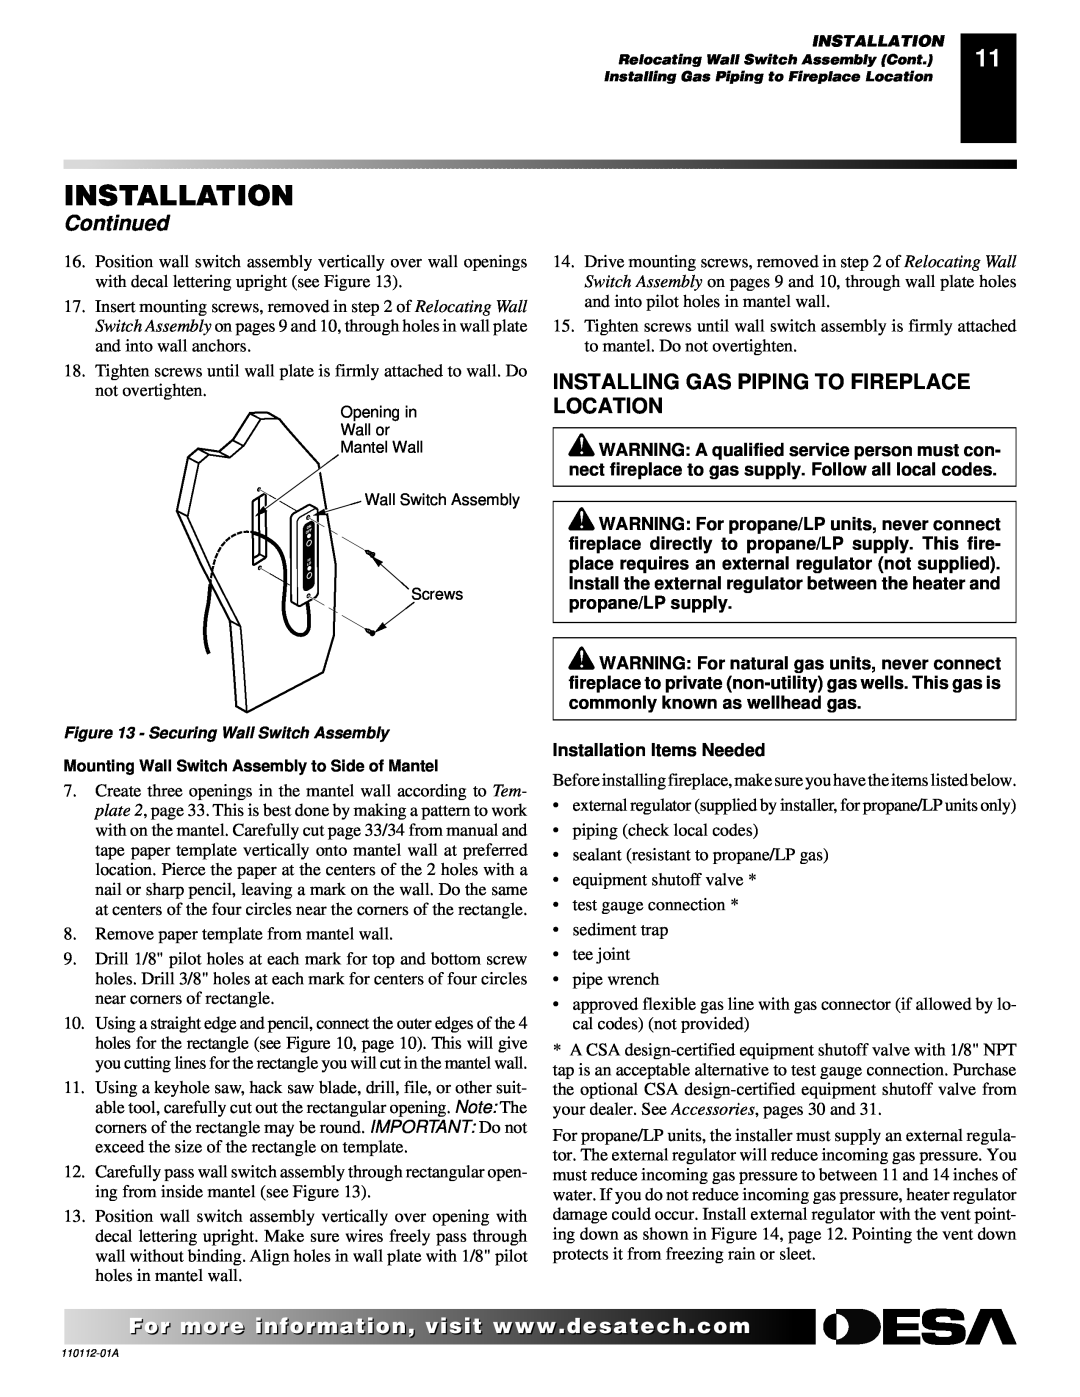 Desa VTGF33NRA installation manual Installing Gas Piping To Fireplace Location, Continued, Installation Items Needed 